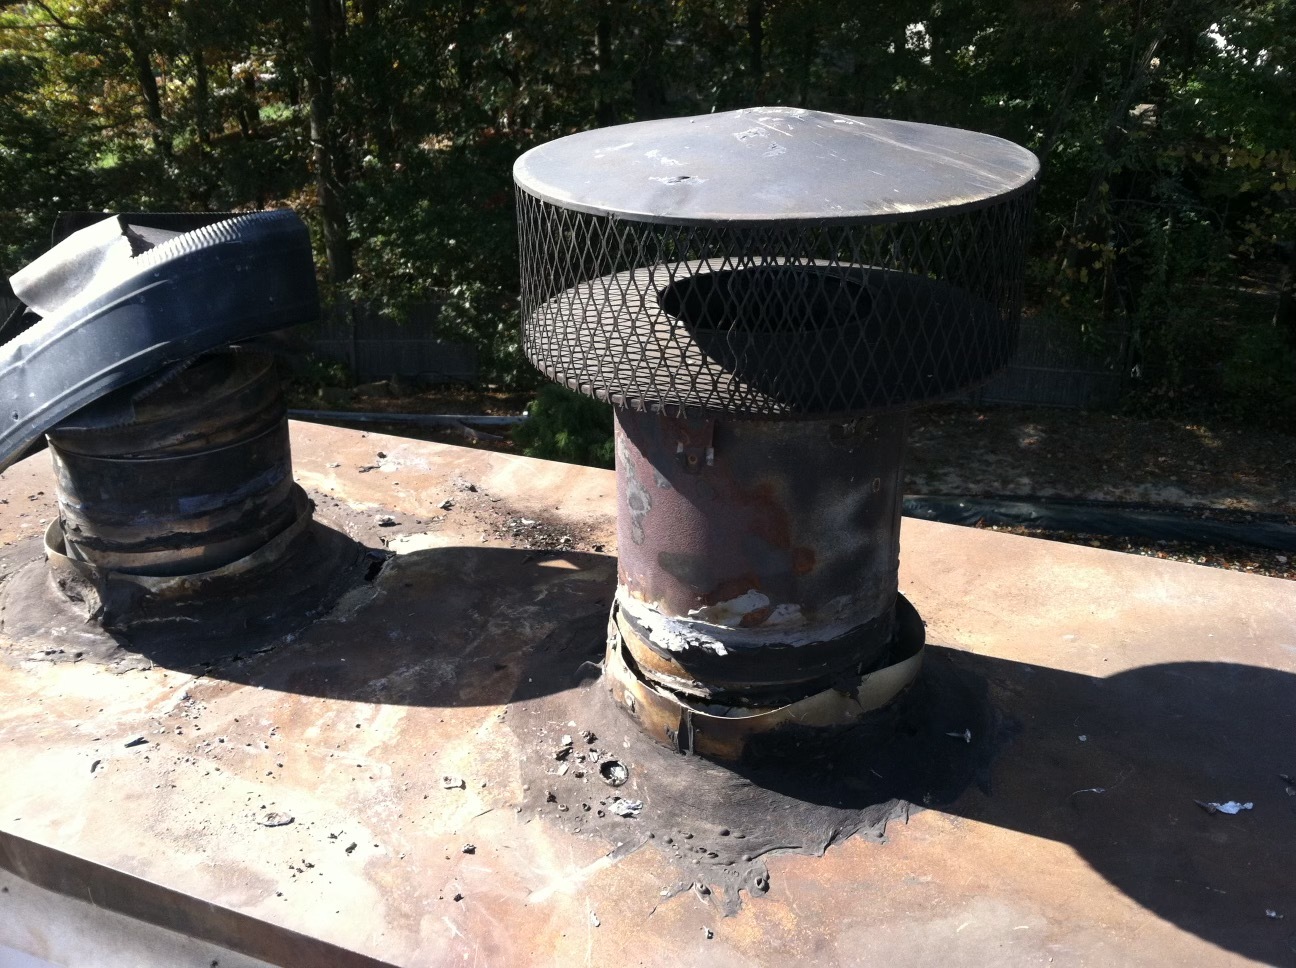 Chimney caps are important for keeping out animals, debris, and water.